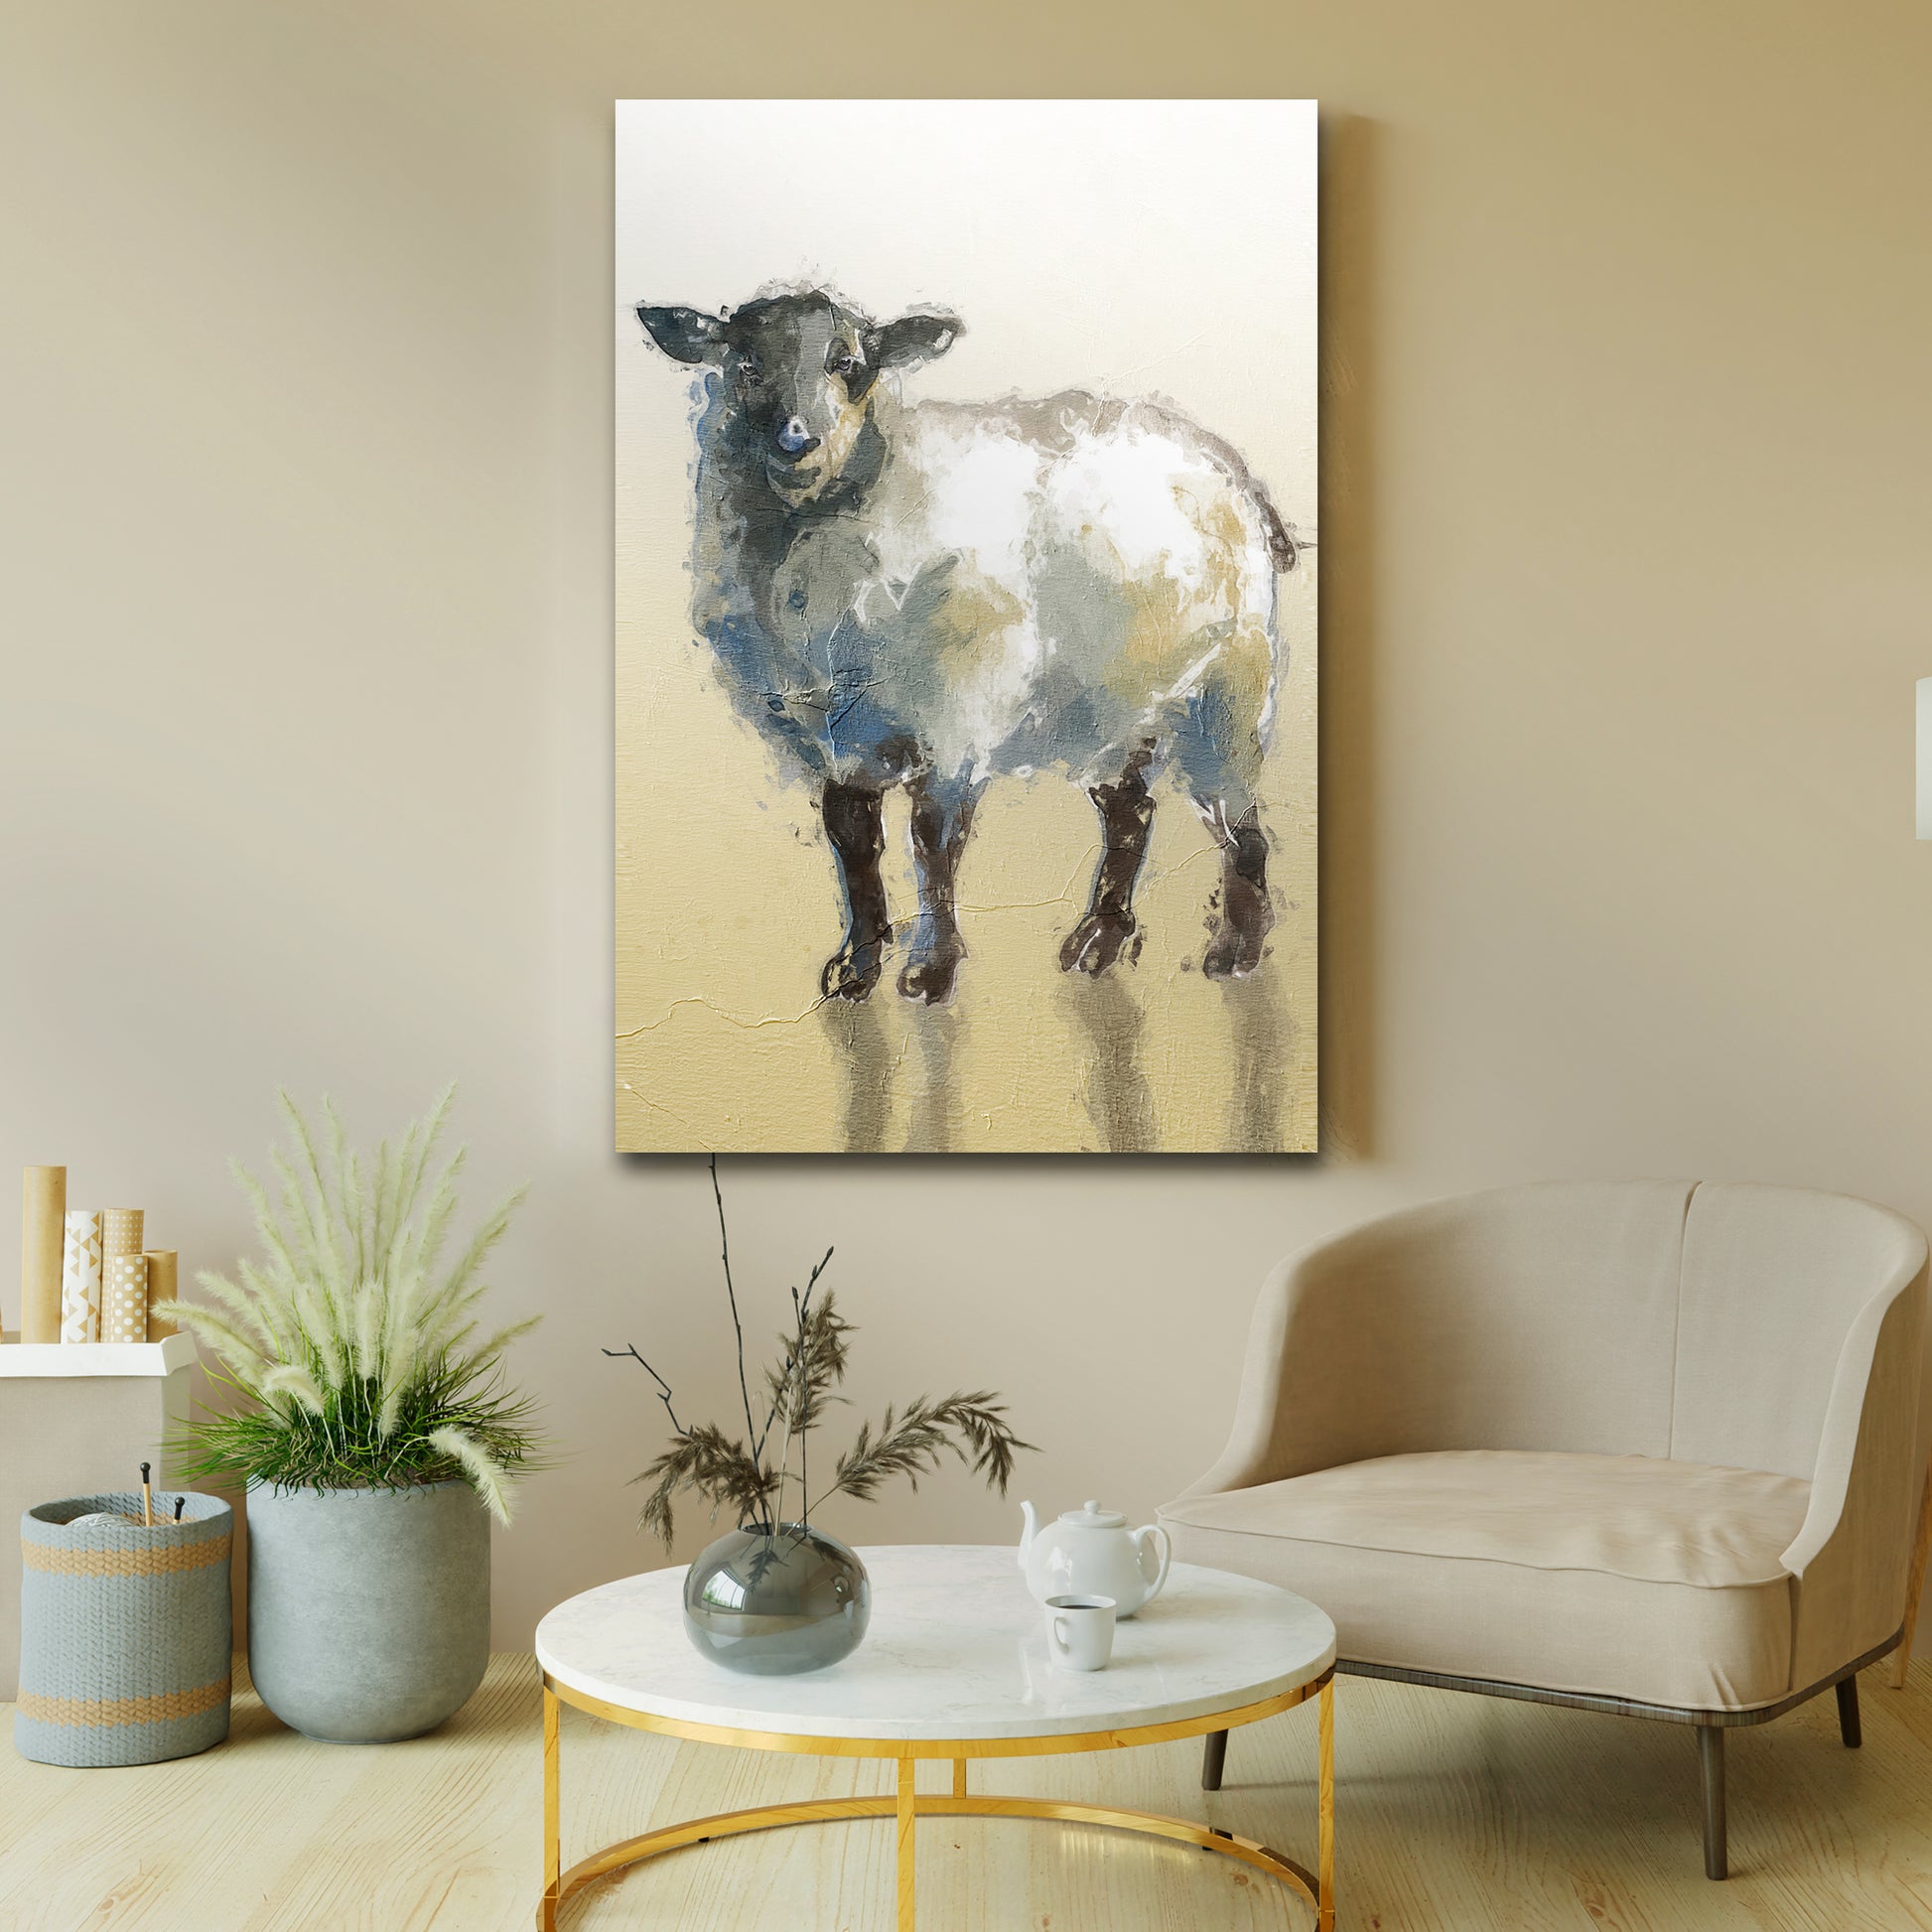 Minimal Sheep Painting Canvas Wall Art - Image by Tailored Canvases